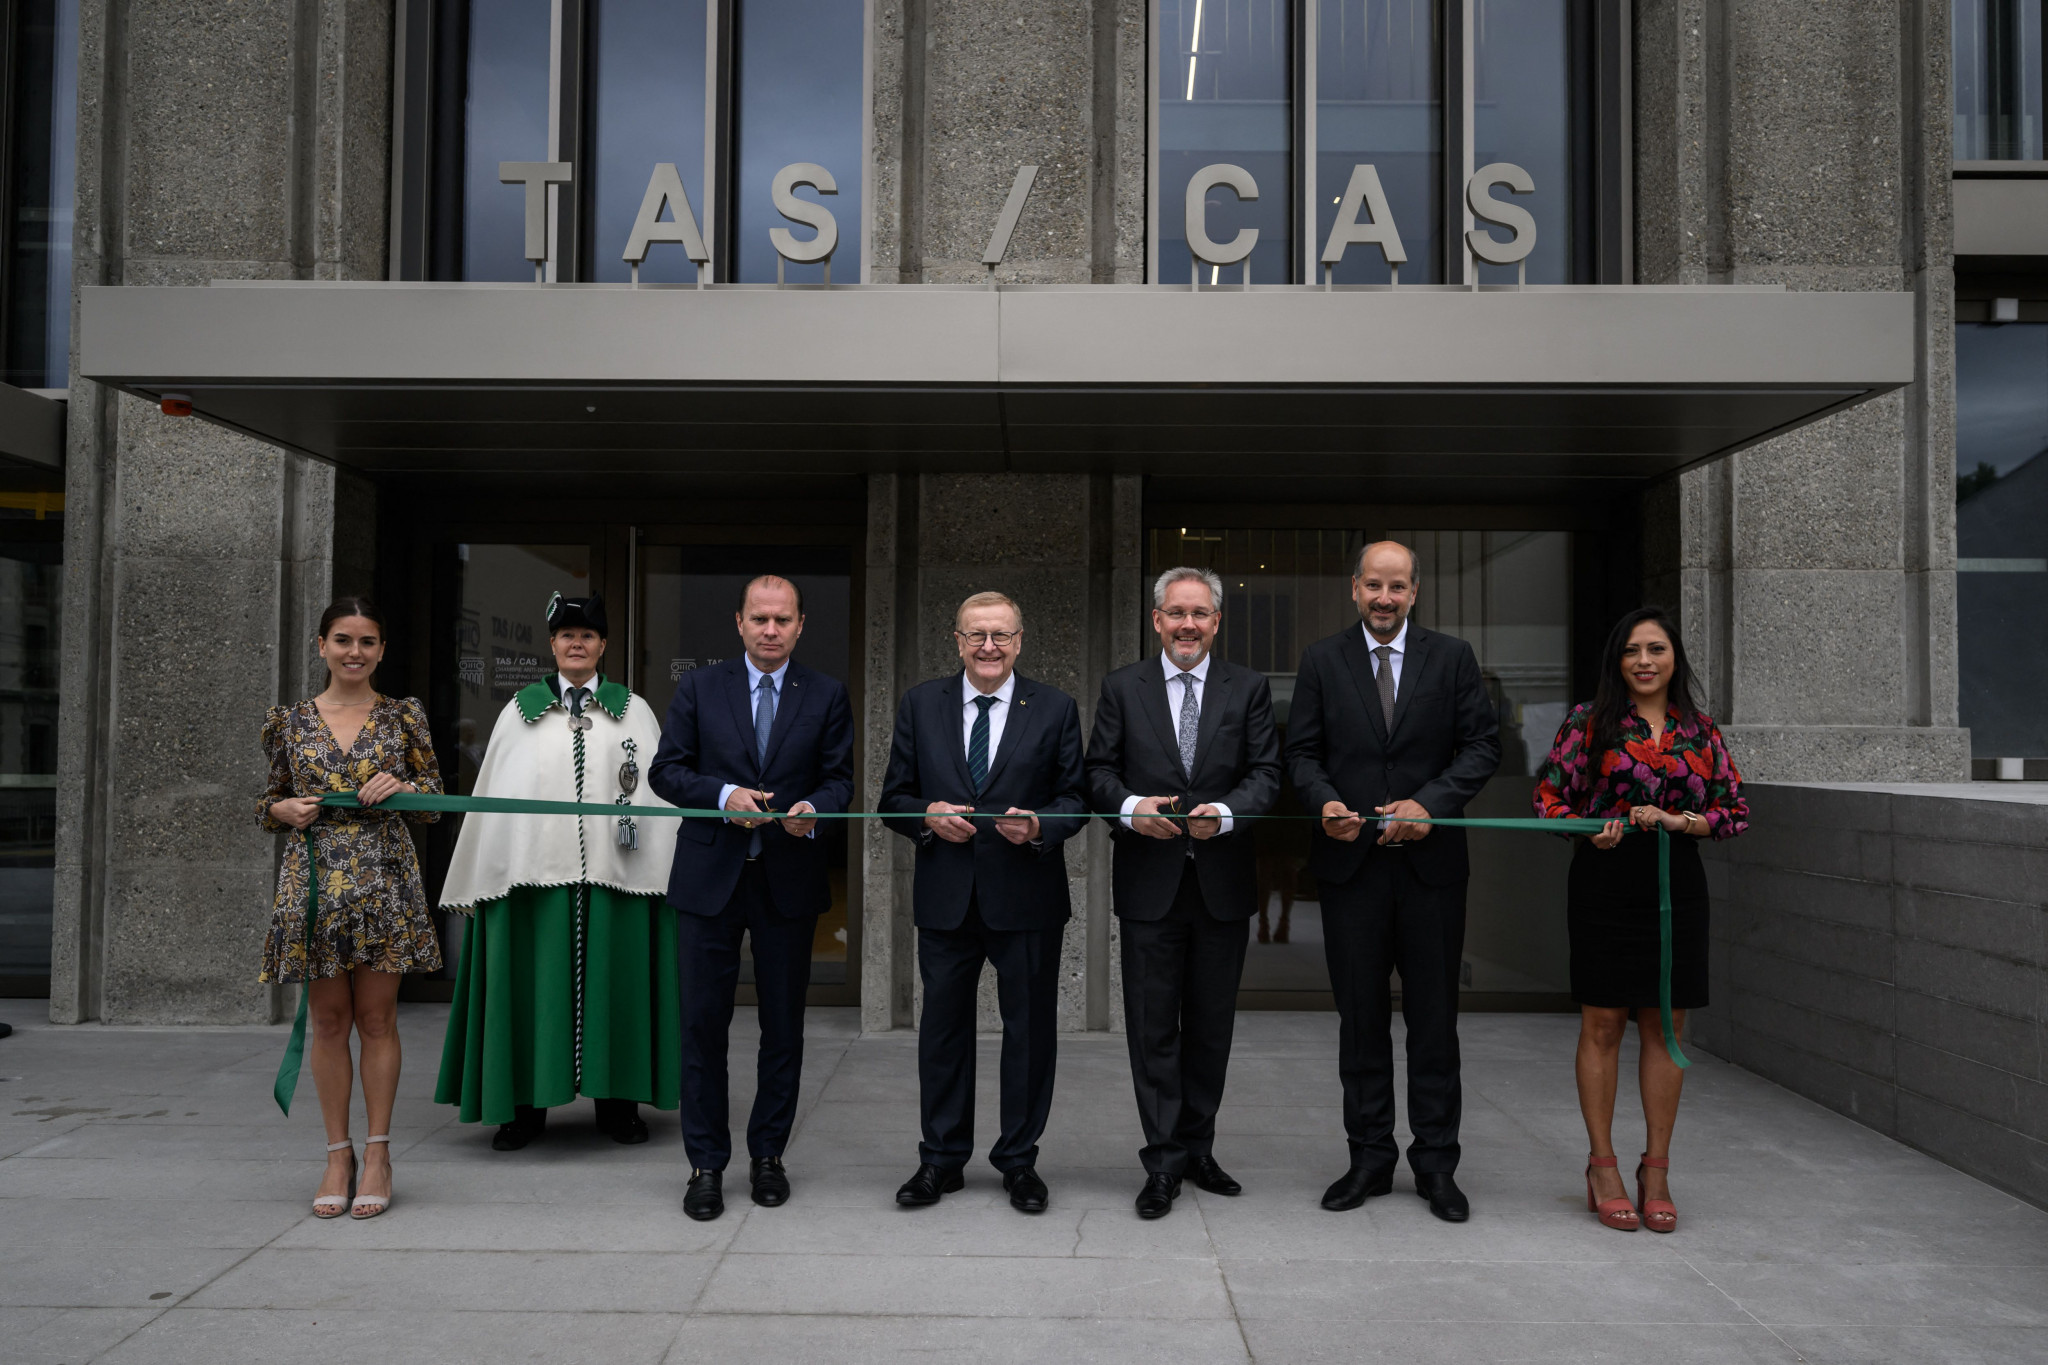 ICAS President John Coates, centre, inaugurated the new CAS headquarters in Lausanne in June 2022 ©Getty Images